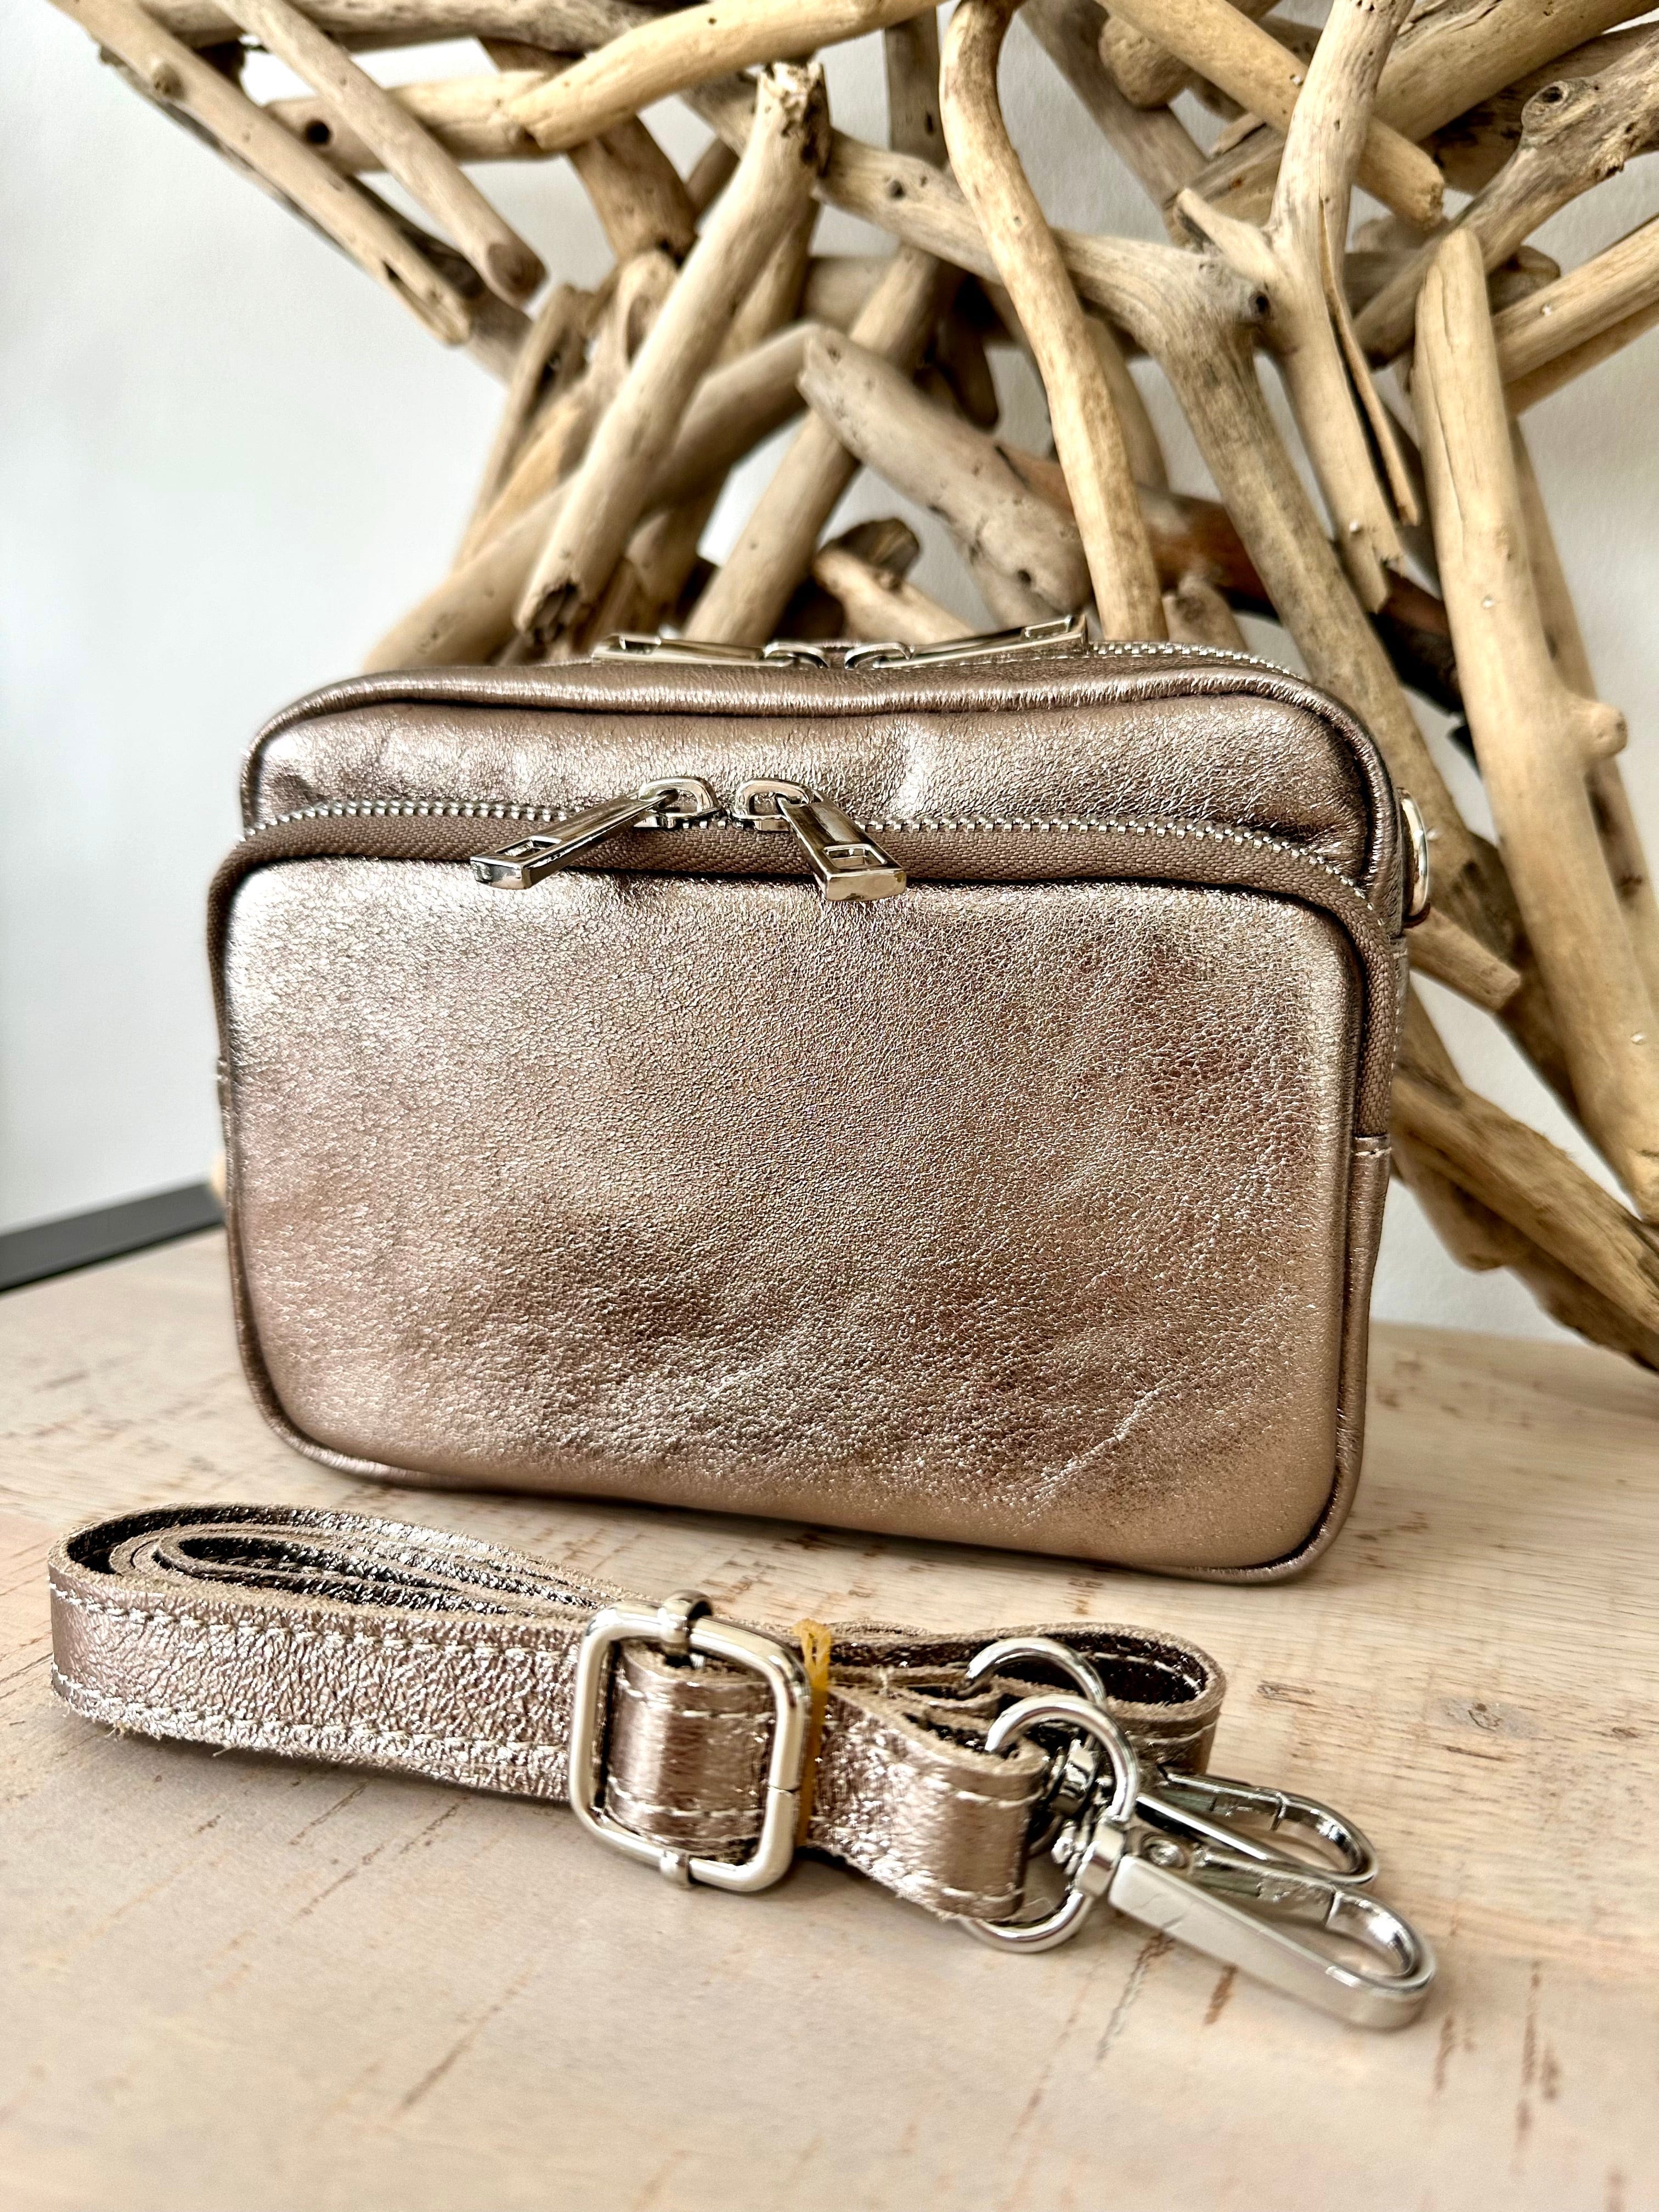 lusciousscarves Metallic Bronze Italian Leather Crossbody Camera Bag with Double Zip , Front Pocket Compartment, 10 Colours available.